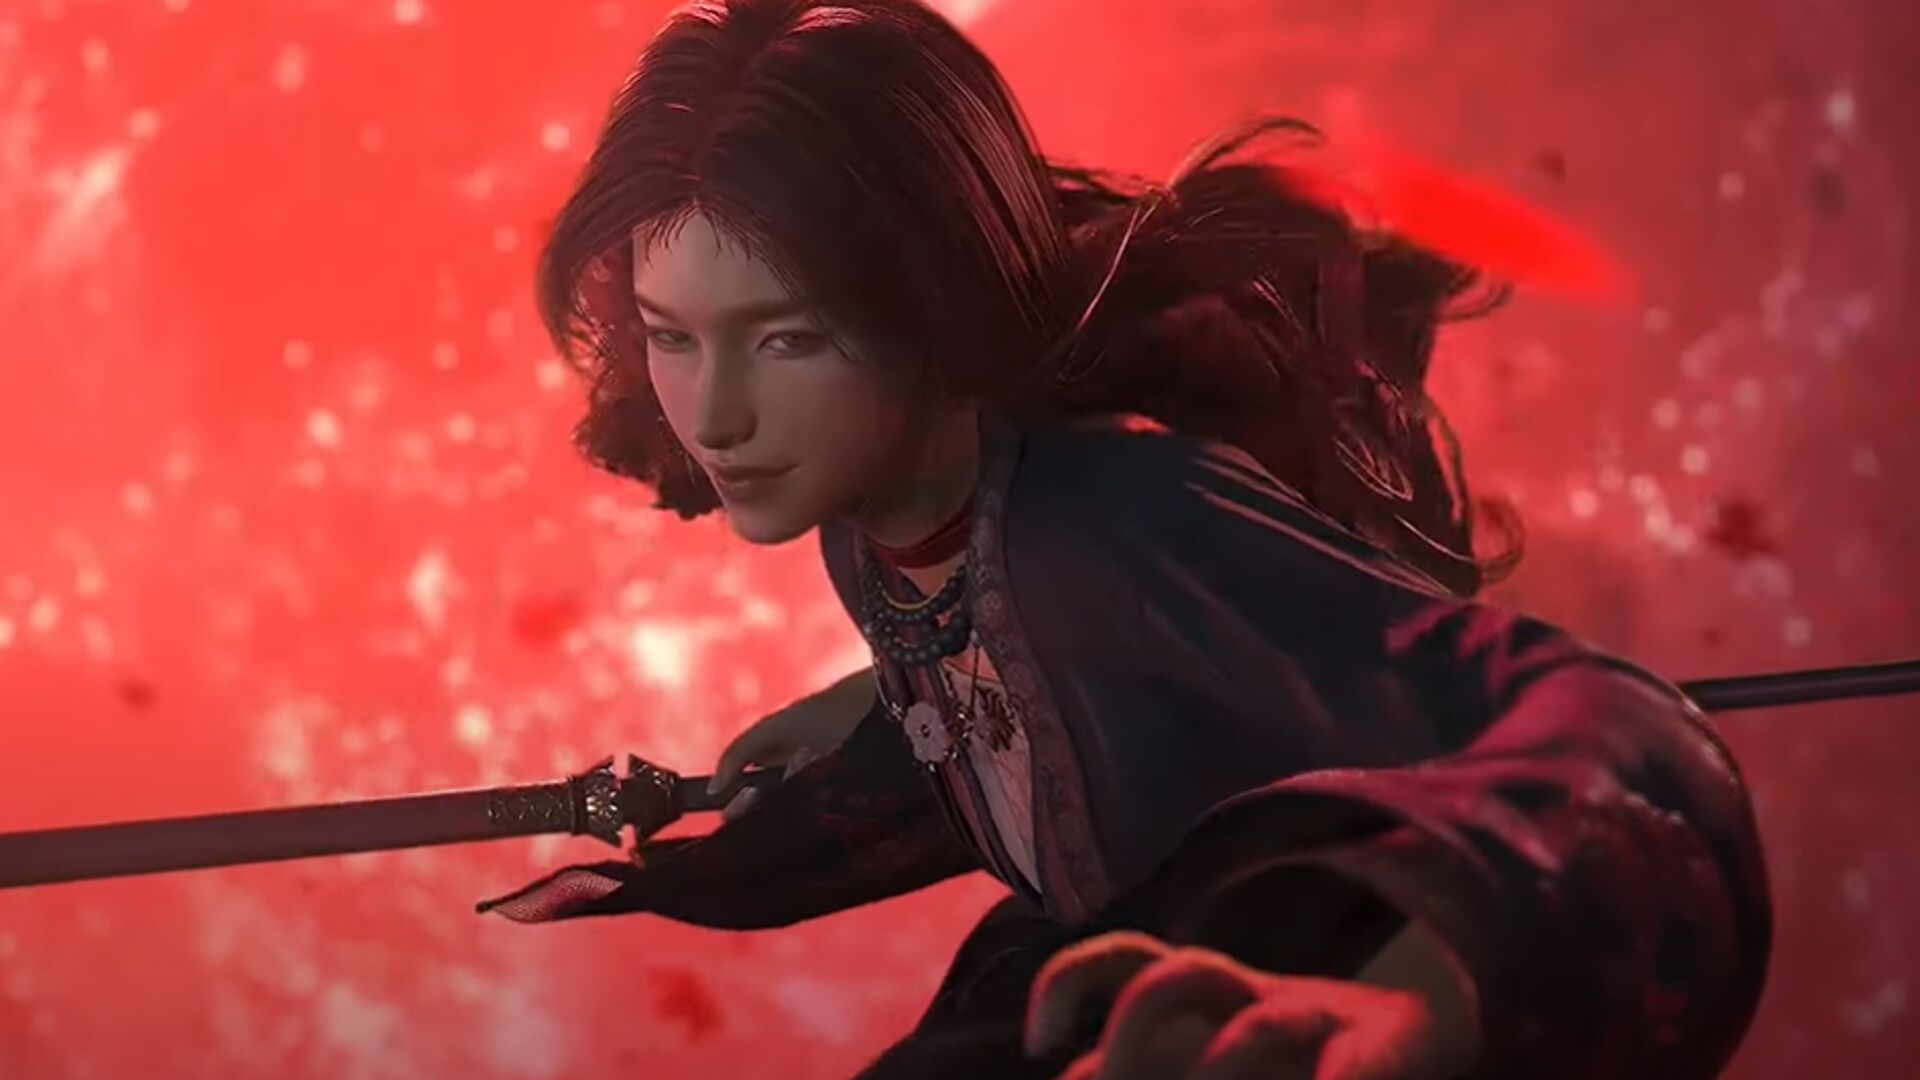 Become a rad assassin or peaceful doctor in open world wuxia RPG Where Winds Meet